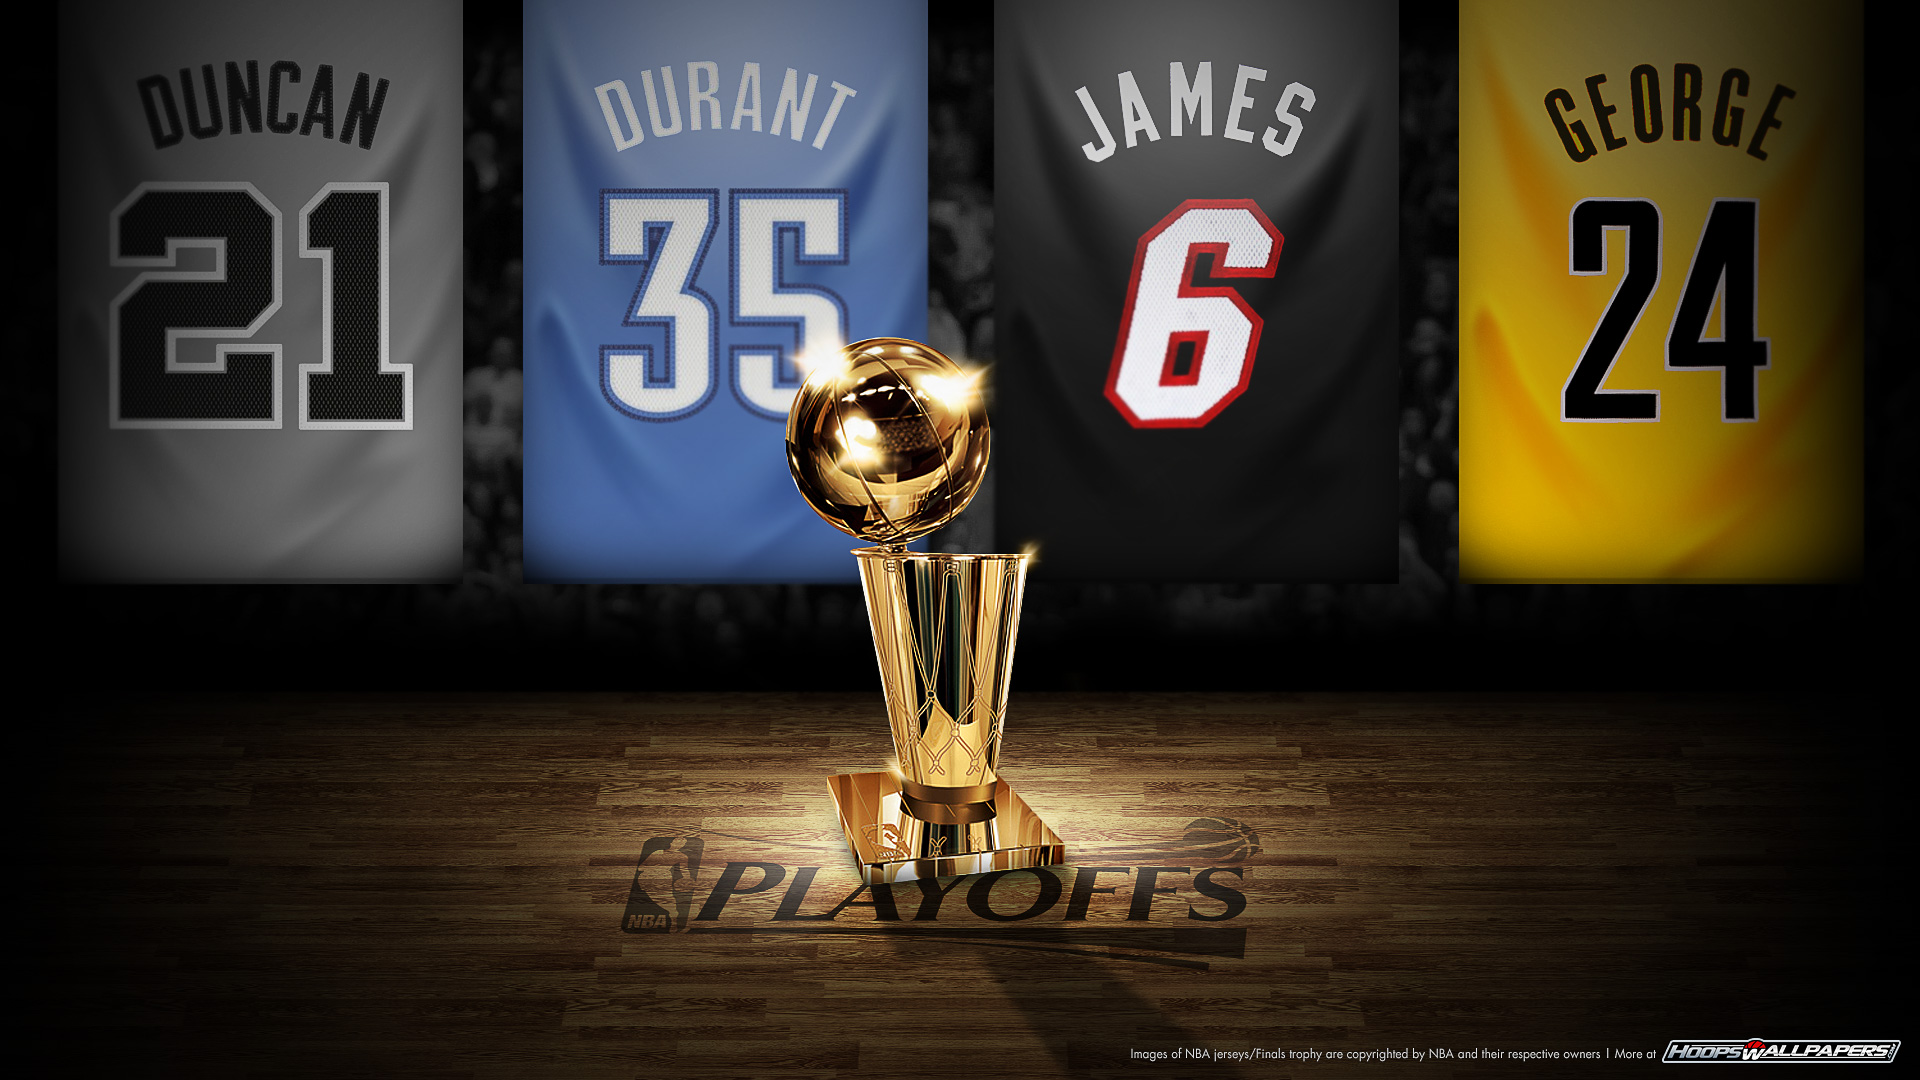  Newest NBA and basketball wallpapers for free download NBA Players